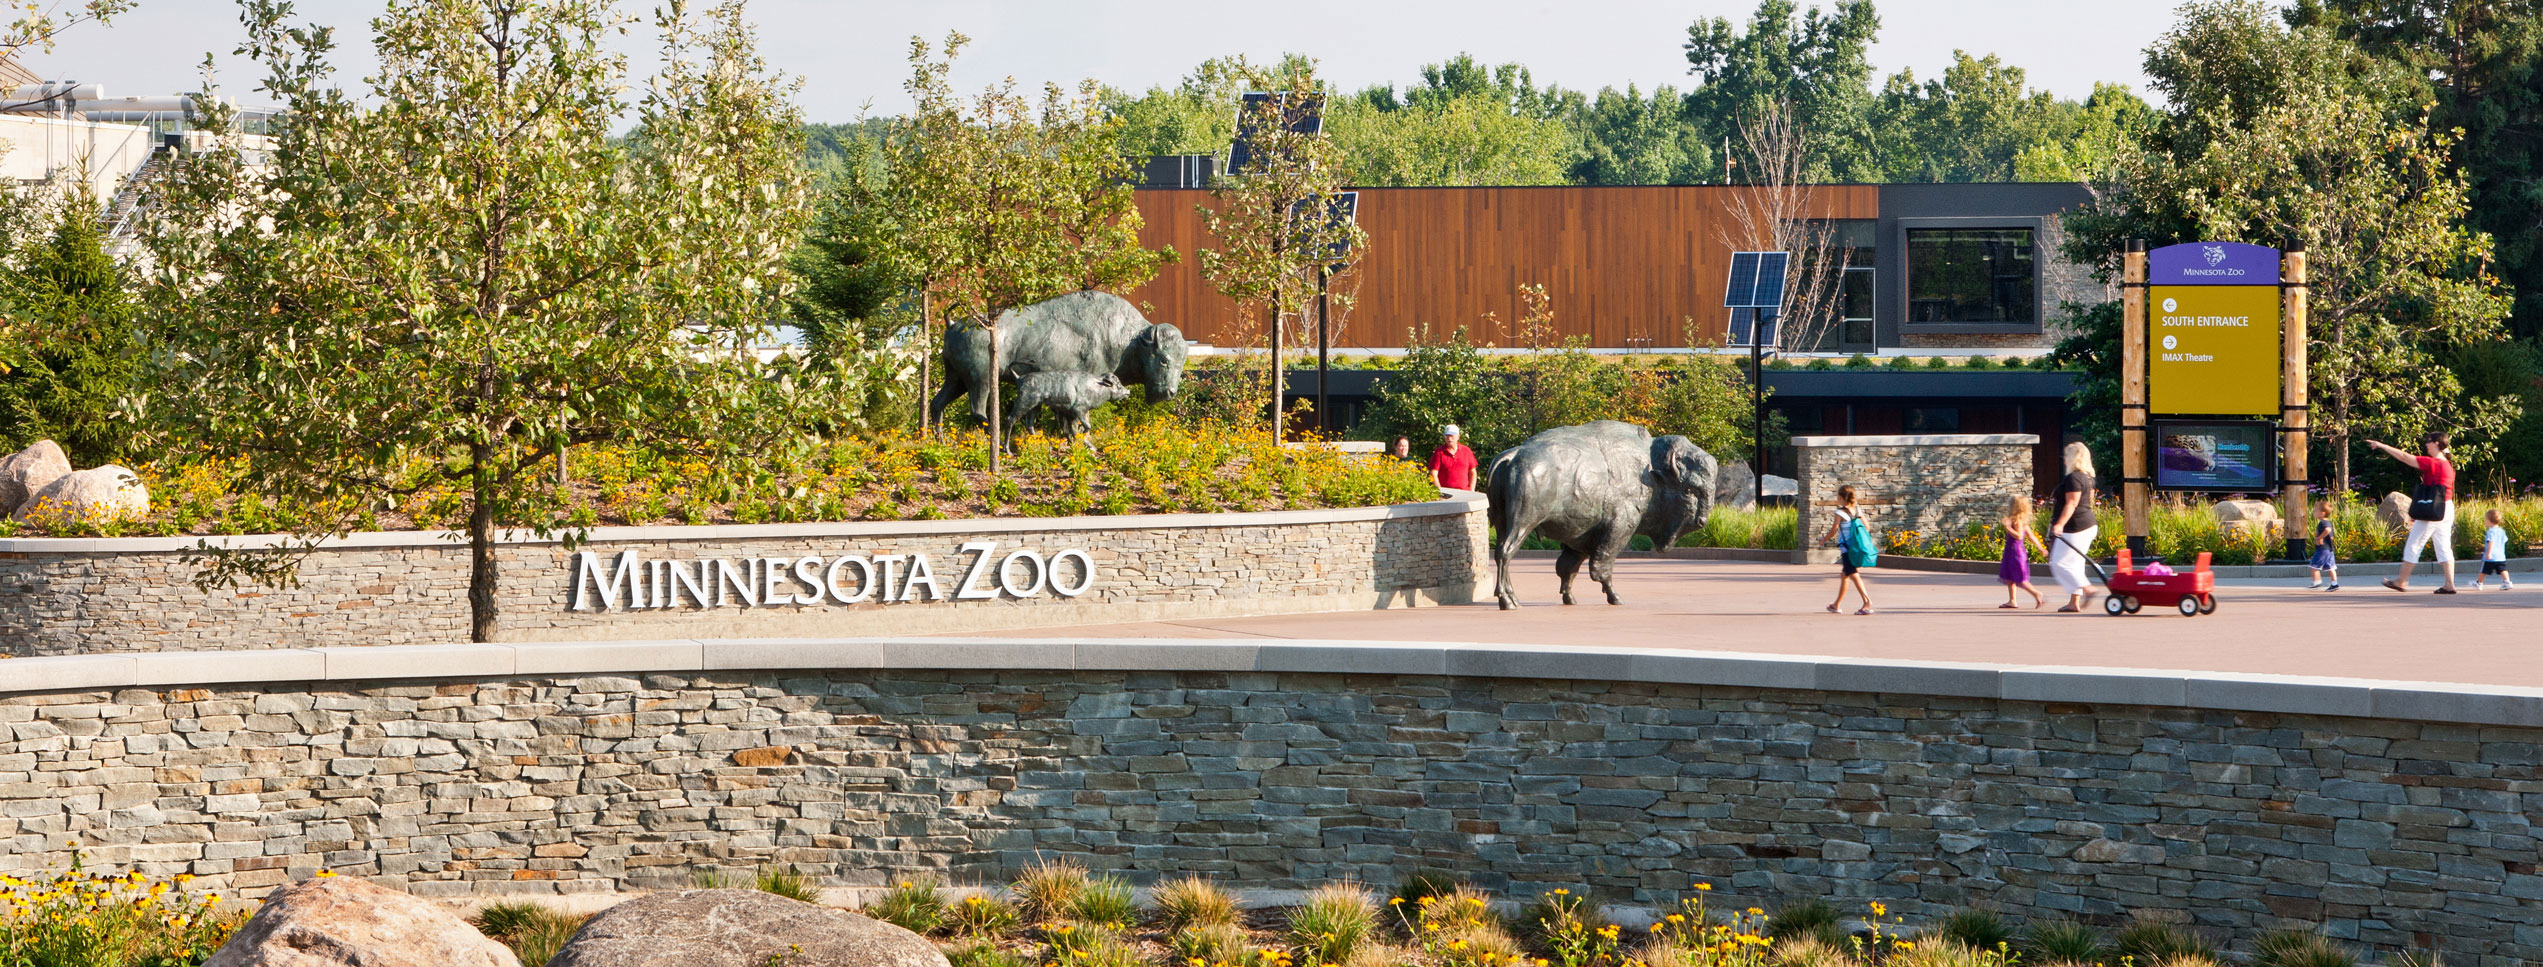 Minnesota Zoo Entrance with bison statue